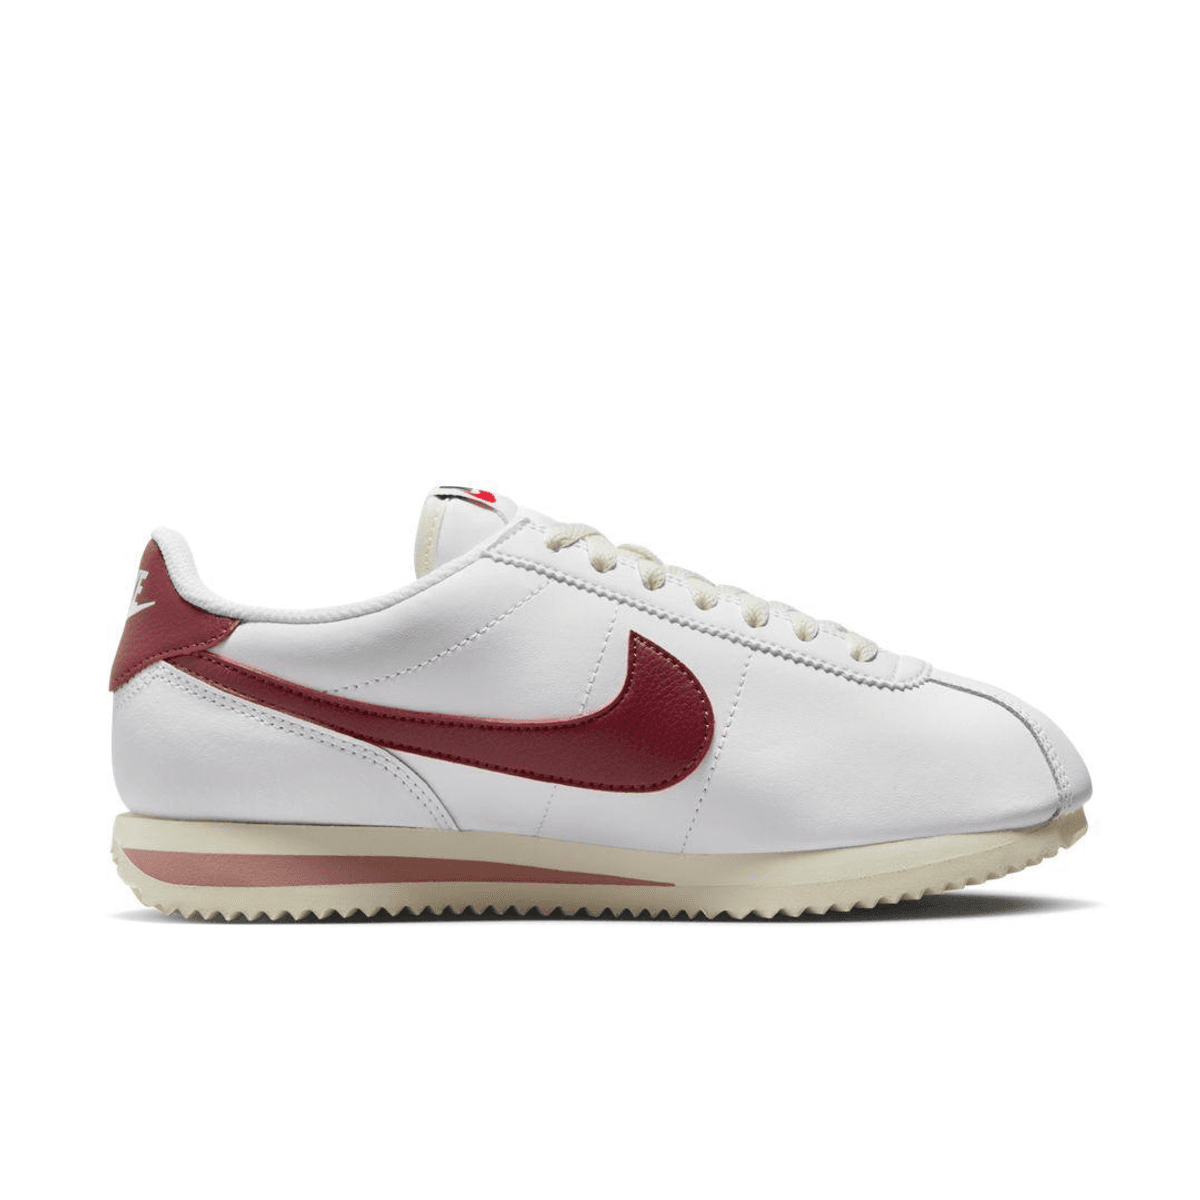 The Nike Cortez Cedar Is Fresh Enough For Summer And Fall